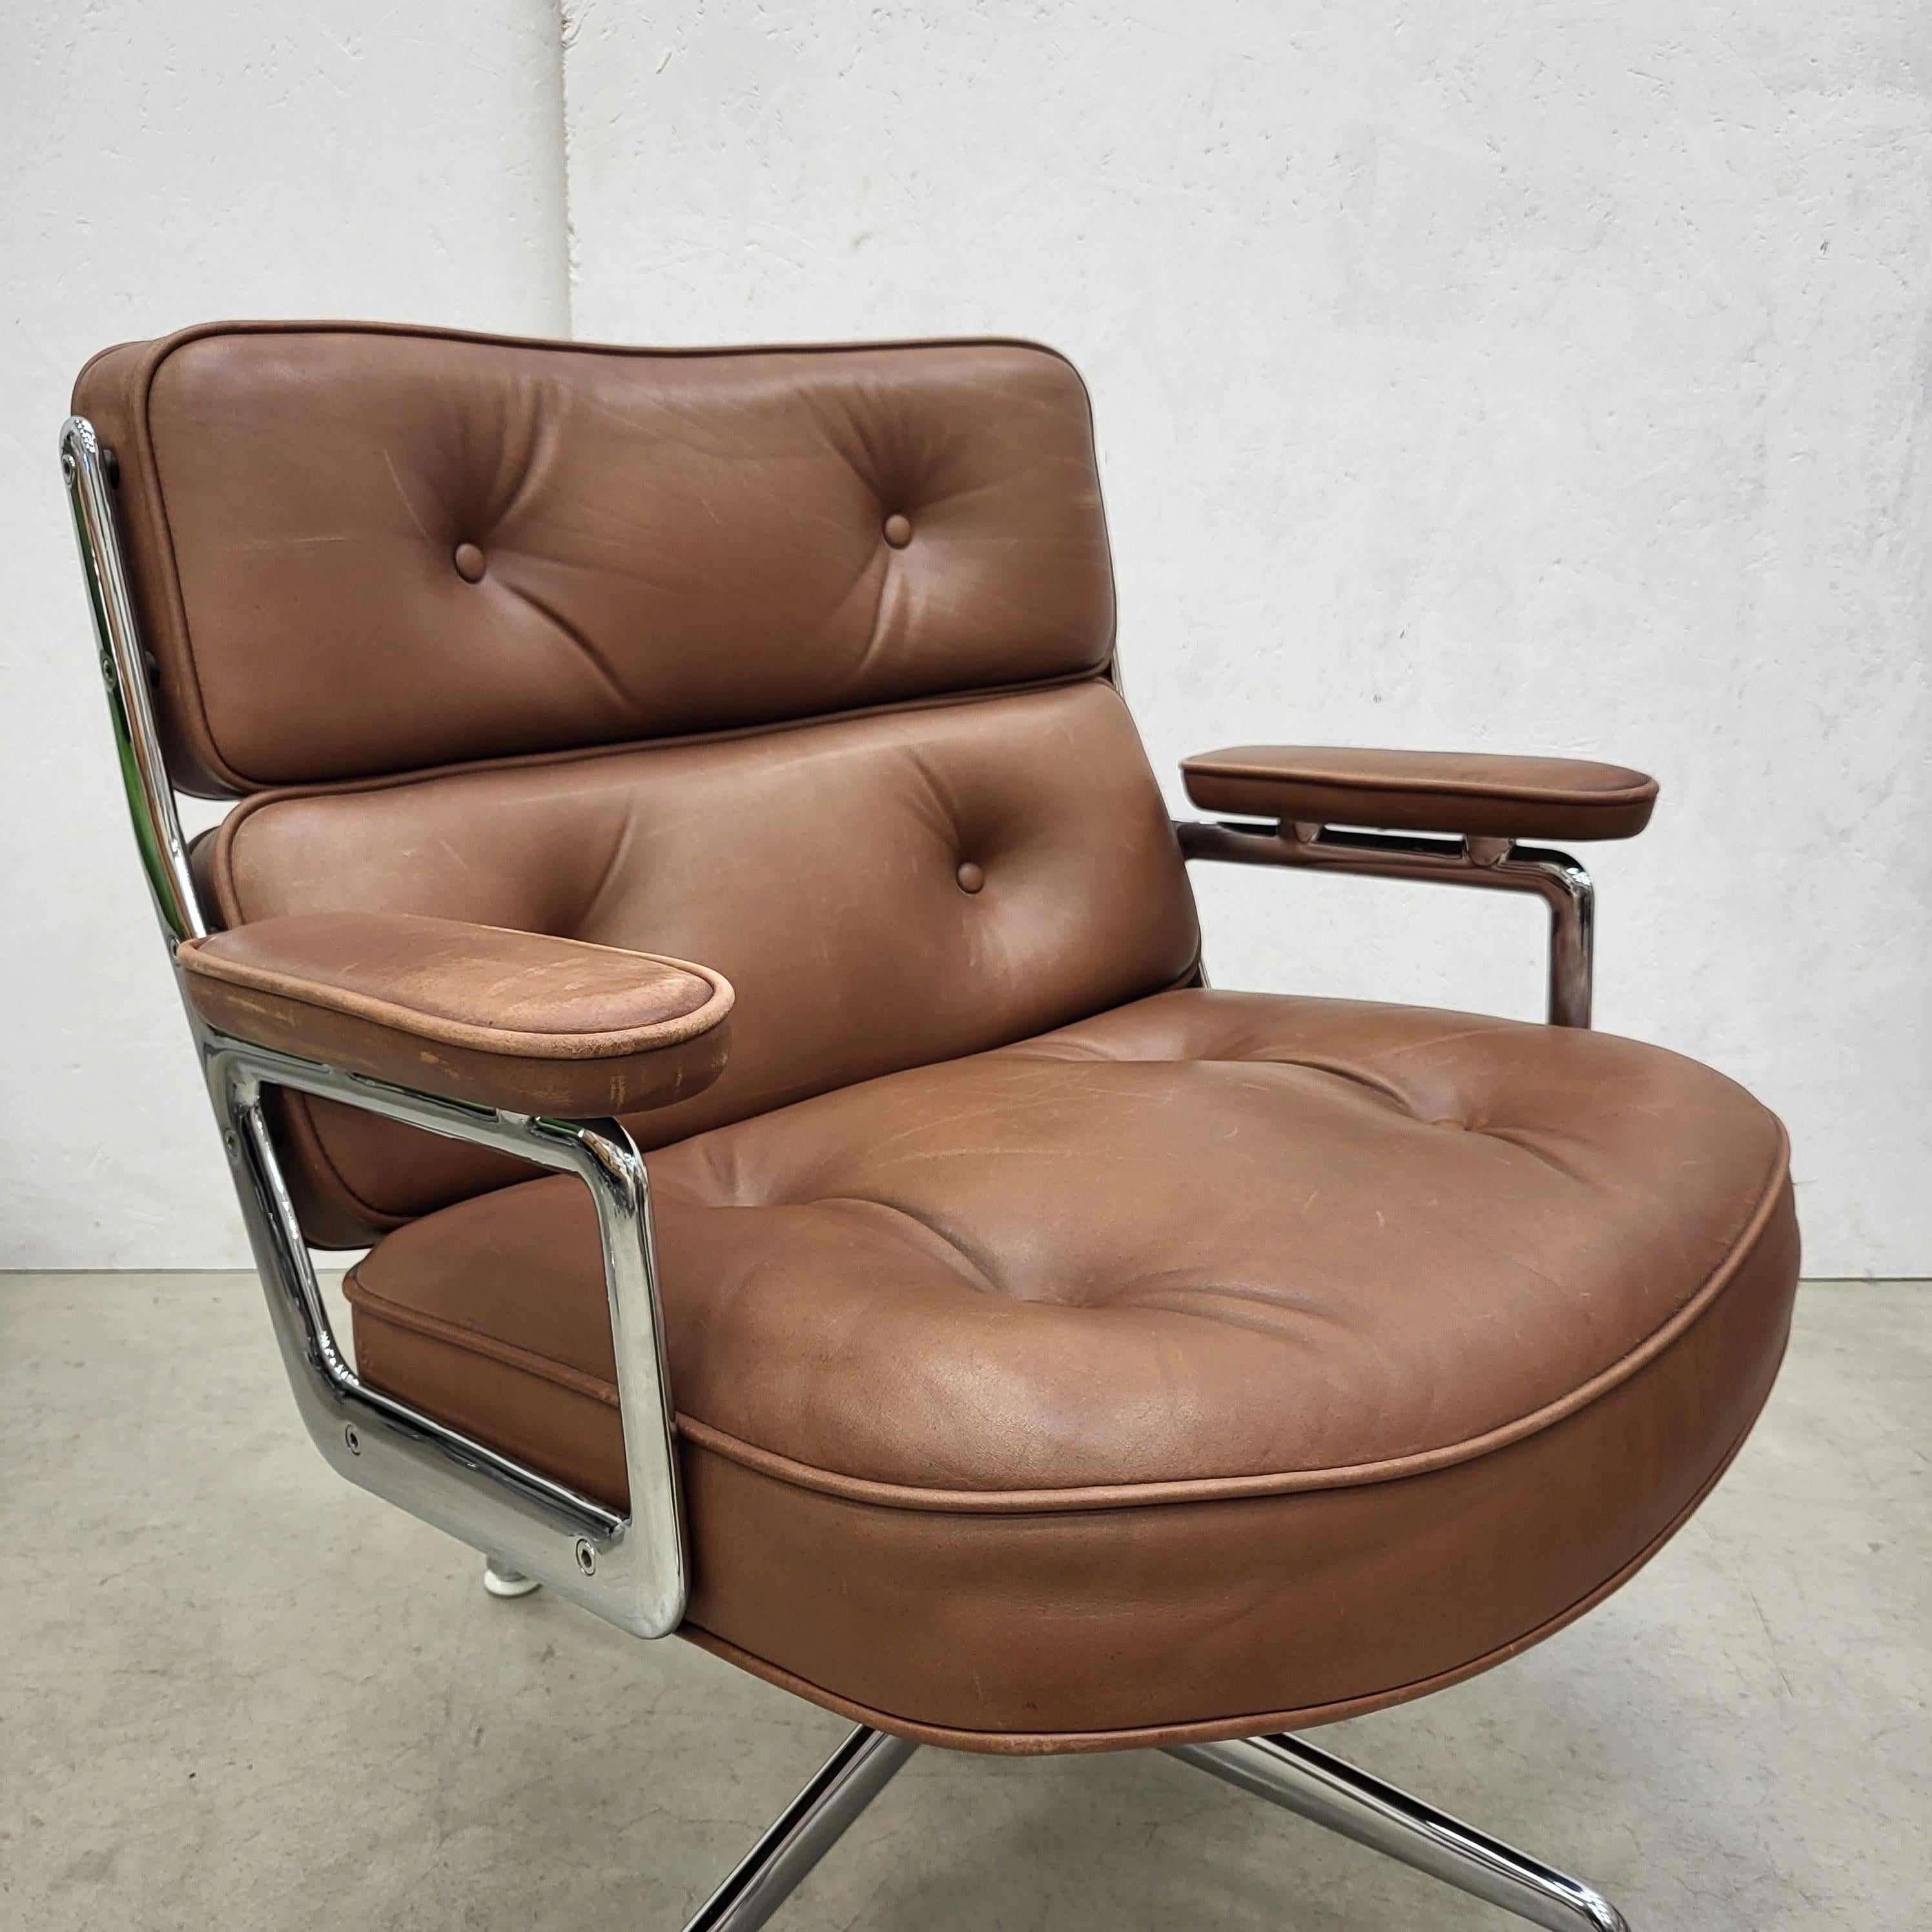 American Set of 10 Vitra Herman Miller ES105 Lobby Chair by Charles Eames 1970s For Sale